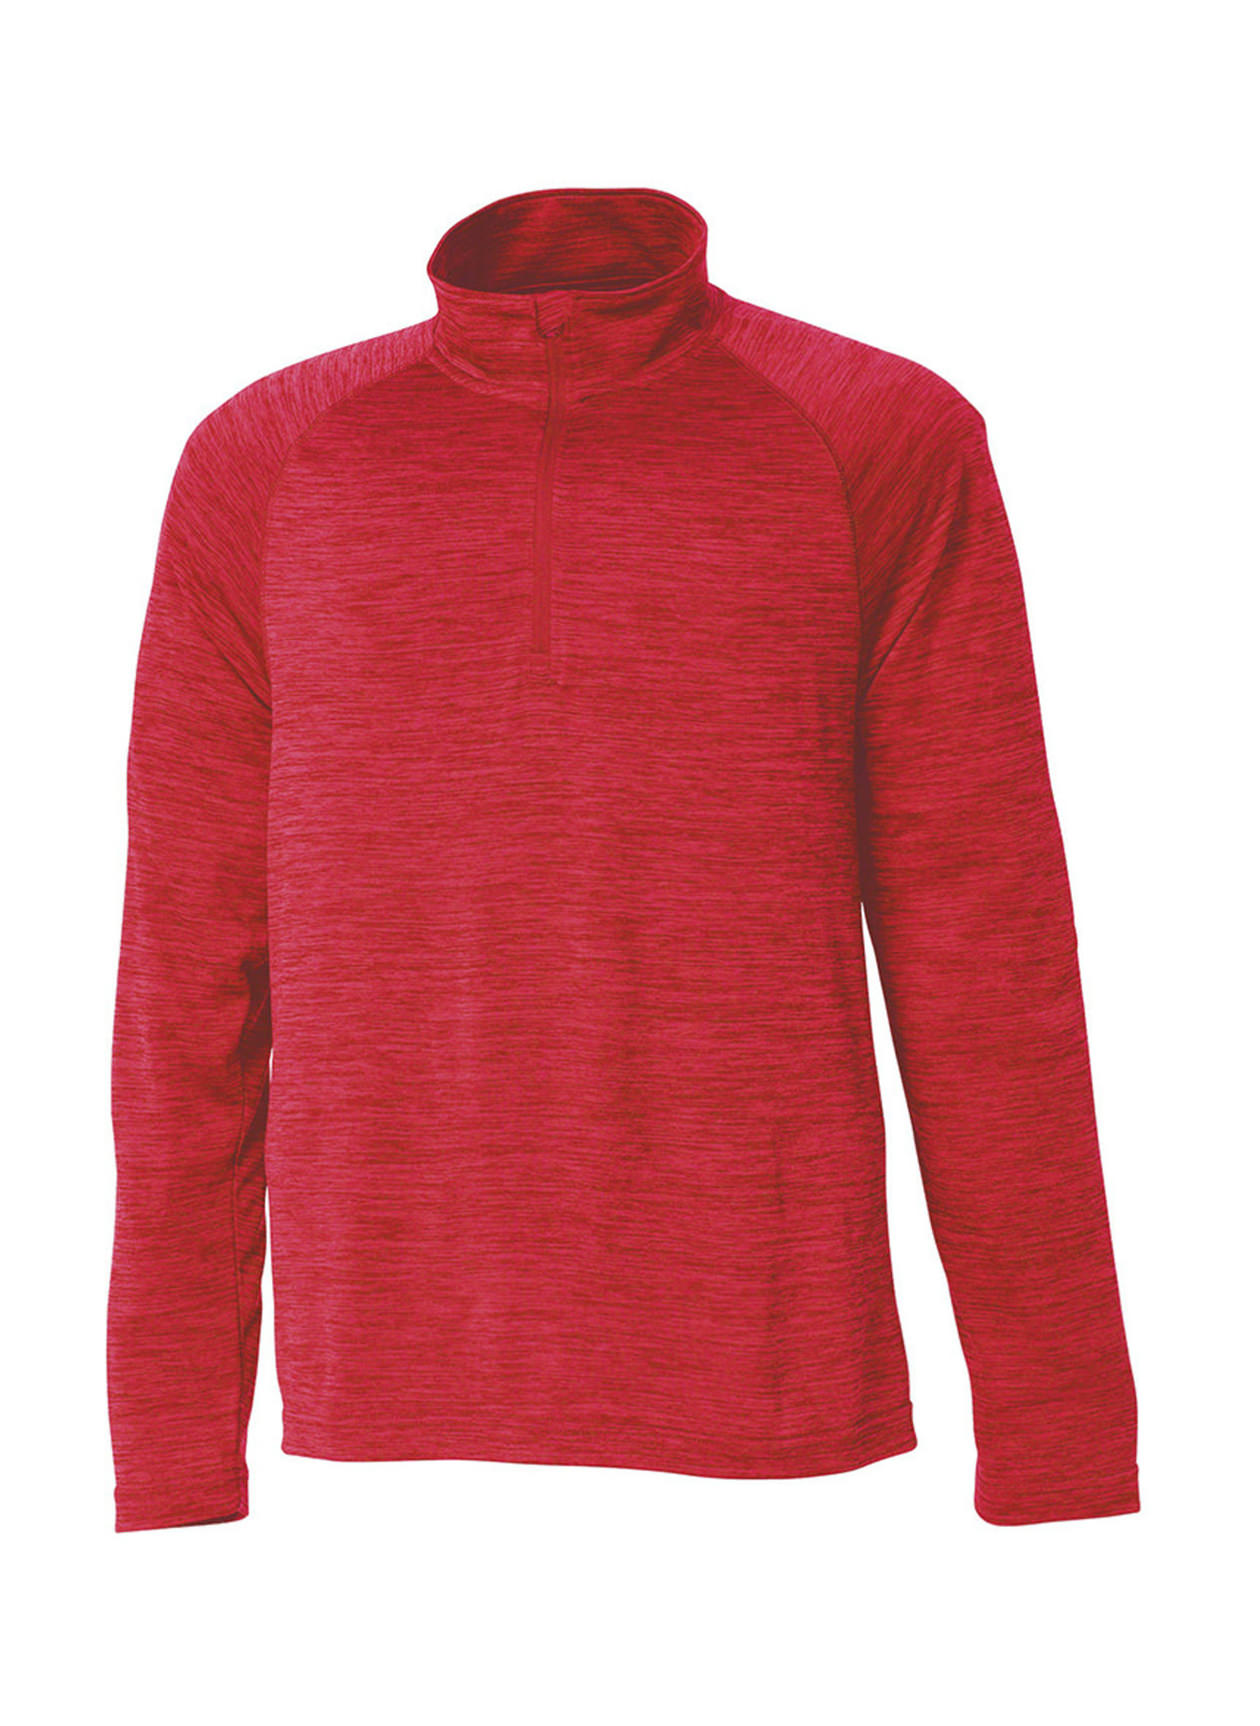 Charles River Men's Red Space Dyed Quarter-Zip